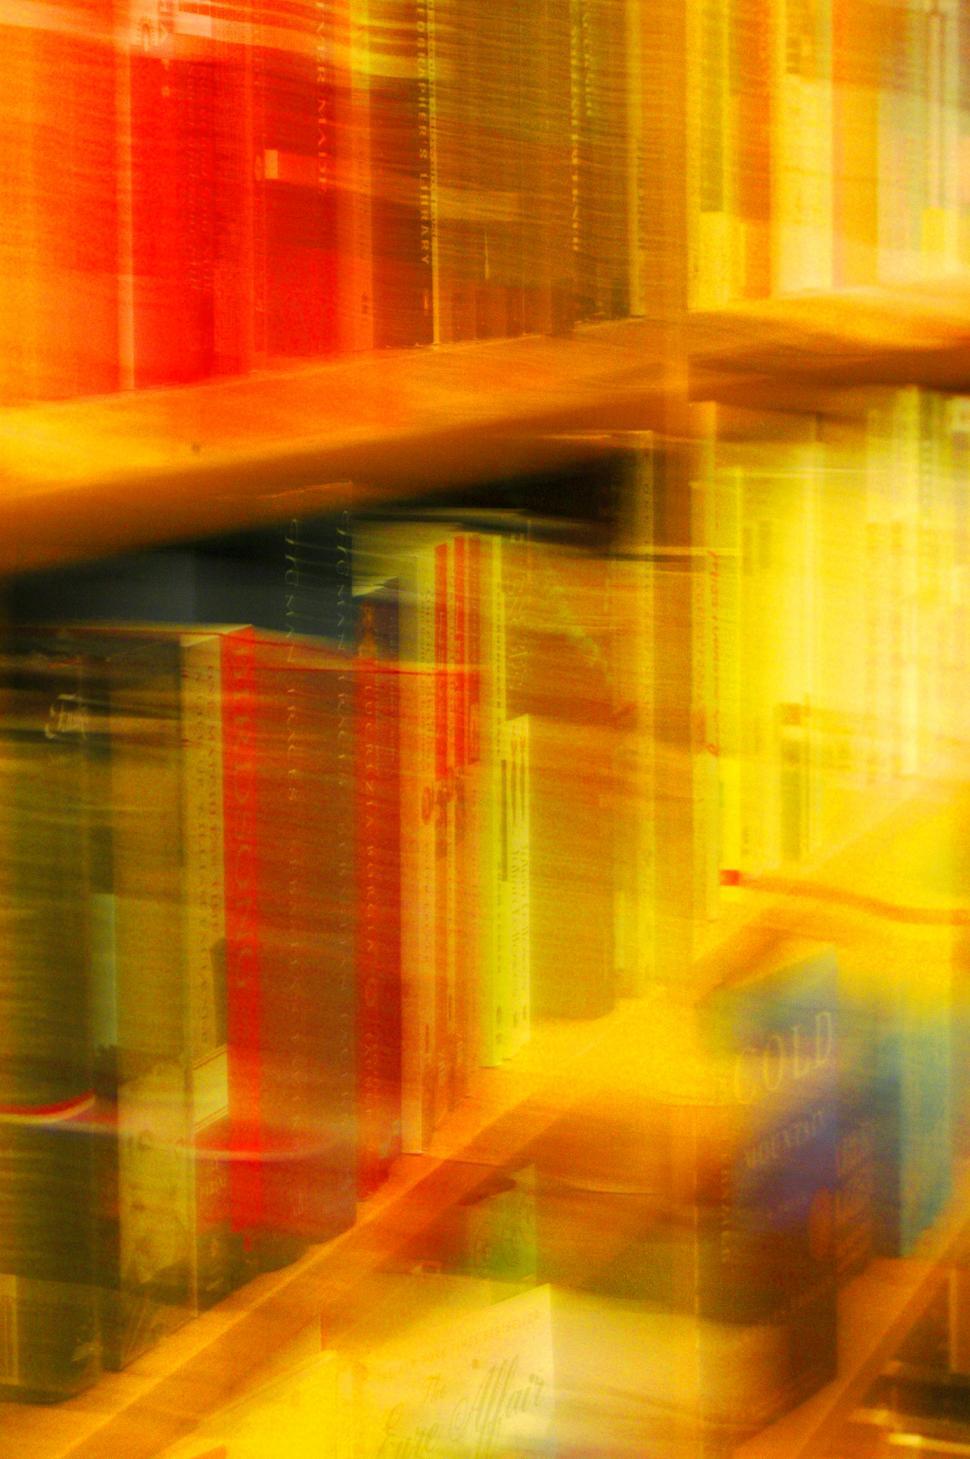 Free Image of Blurry Photo of Bookshelf Filled With Books 